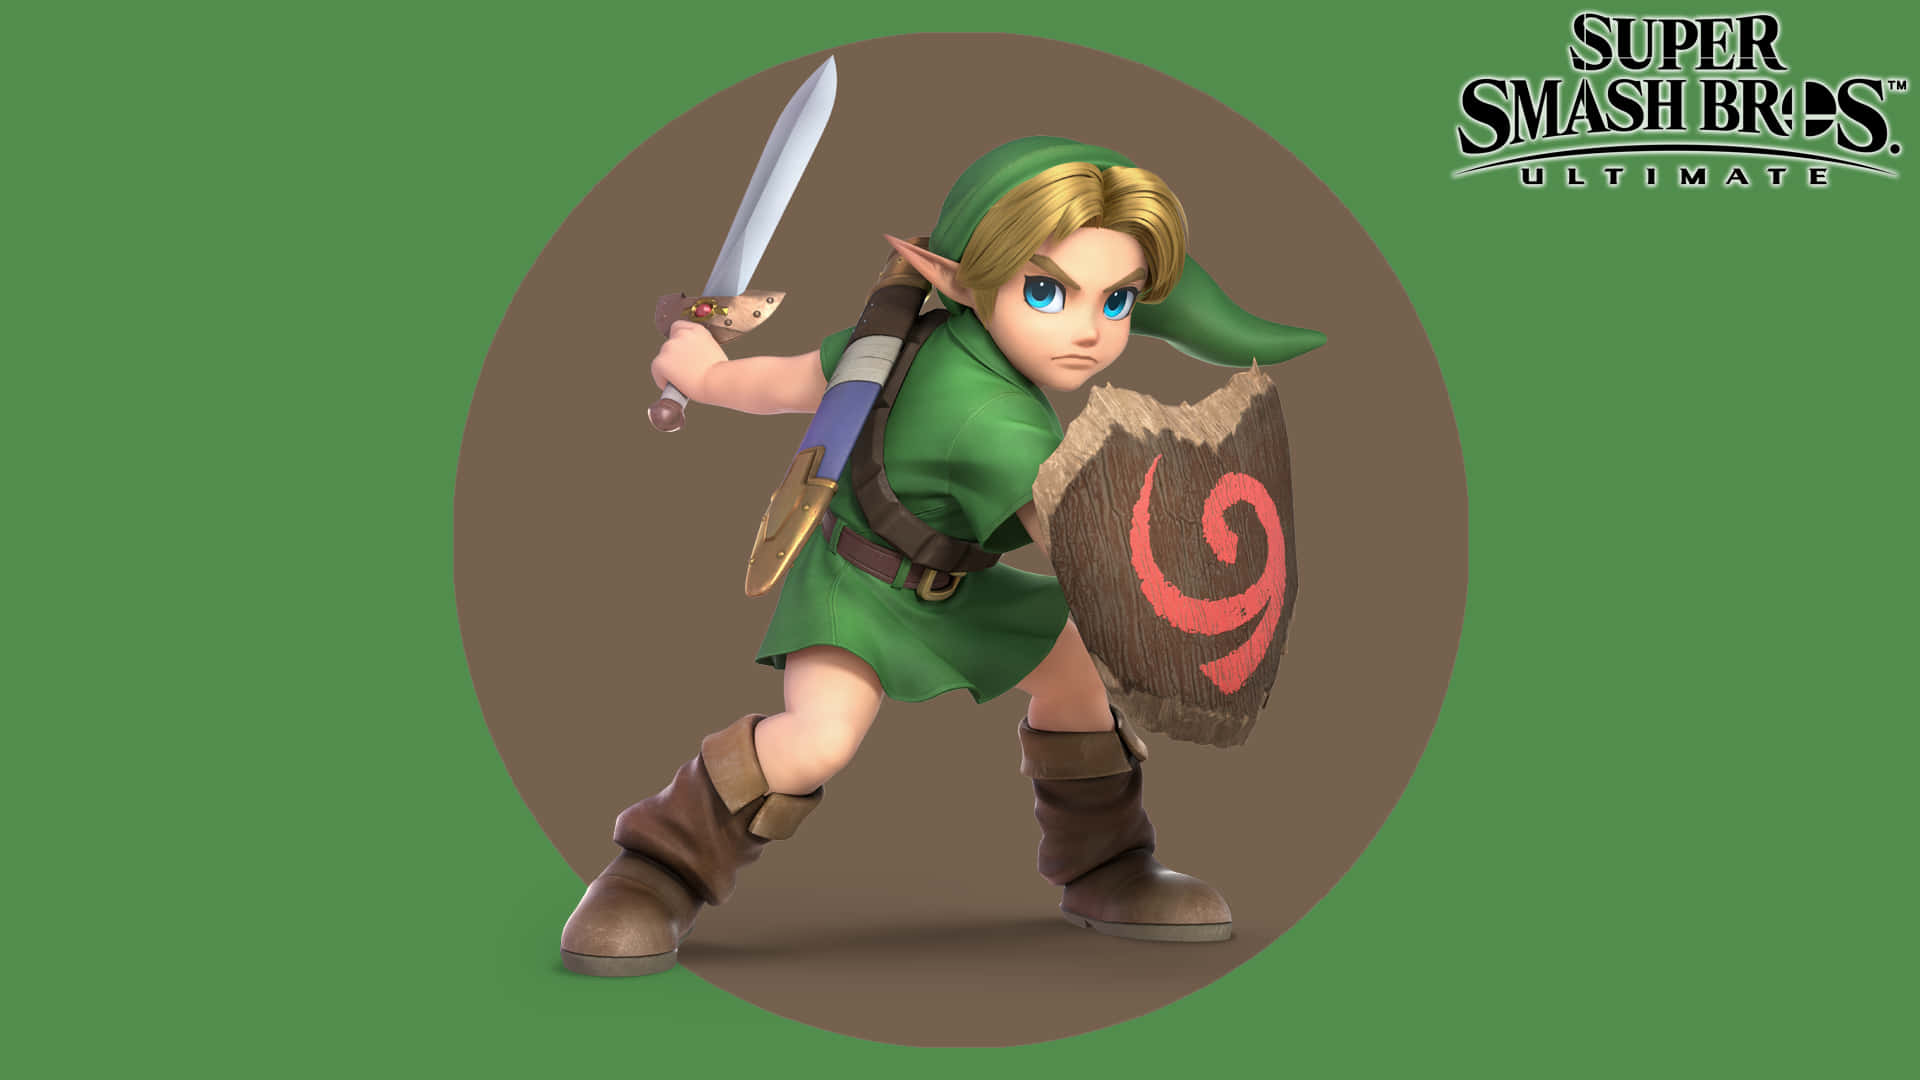 Toon Link Playable In Super Smash Bros Ultimate